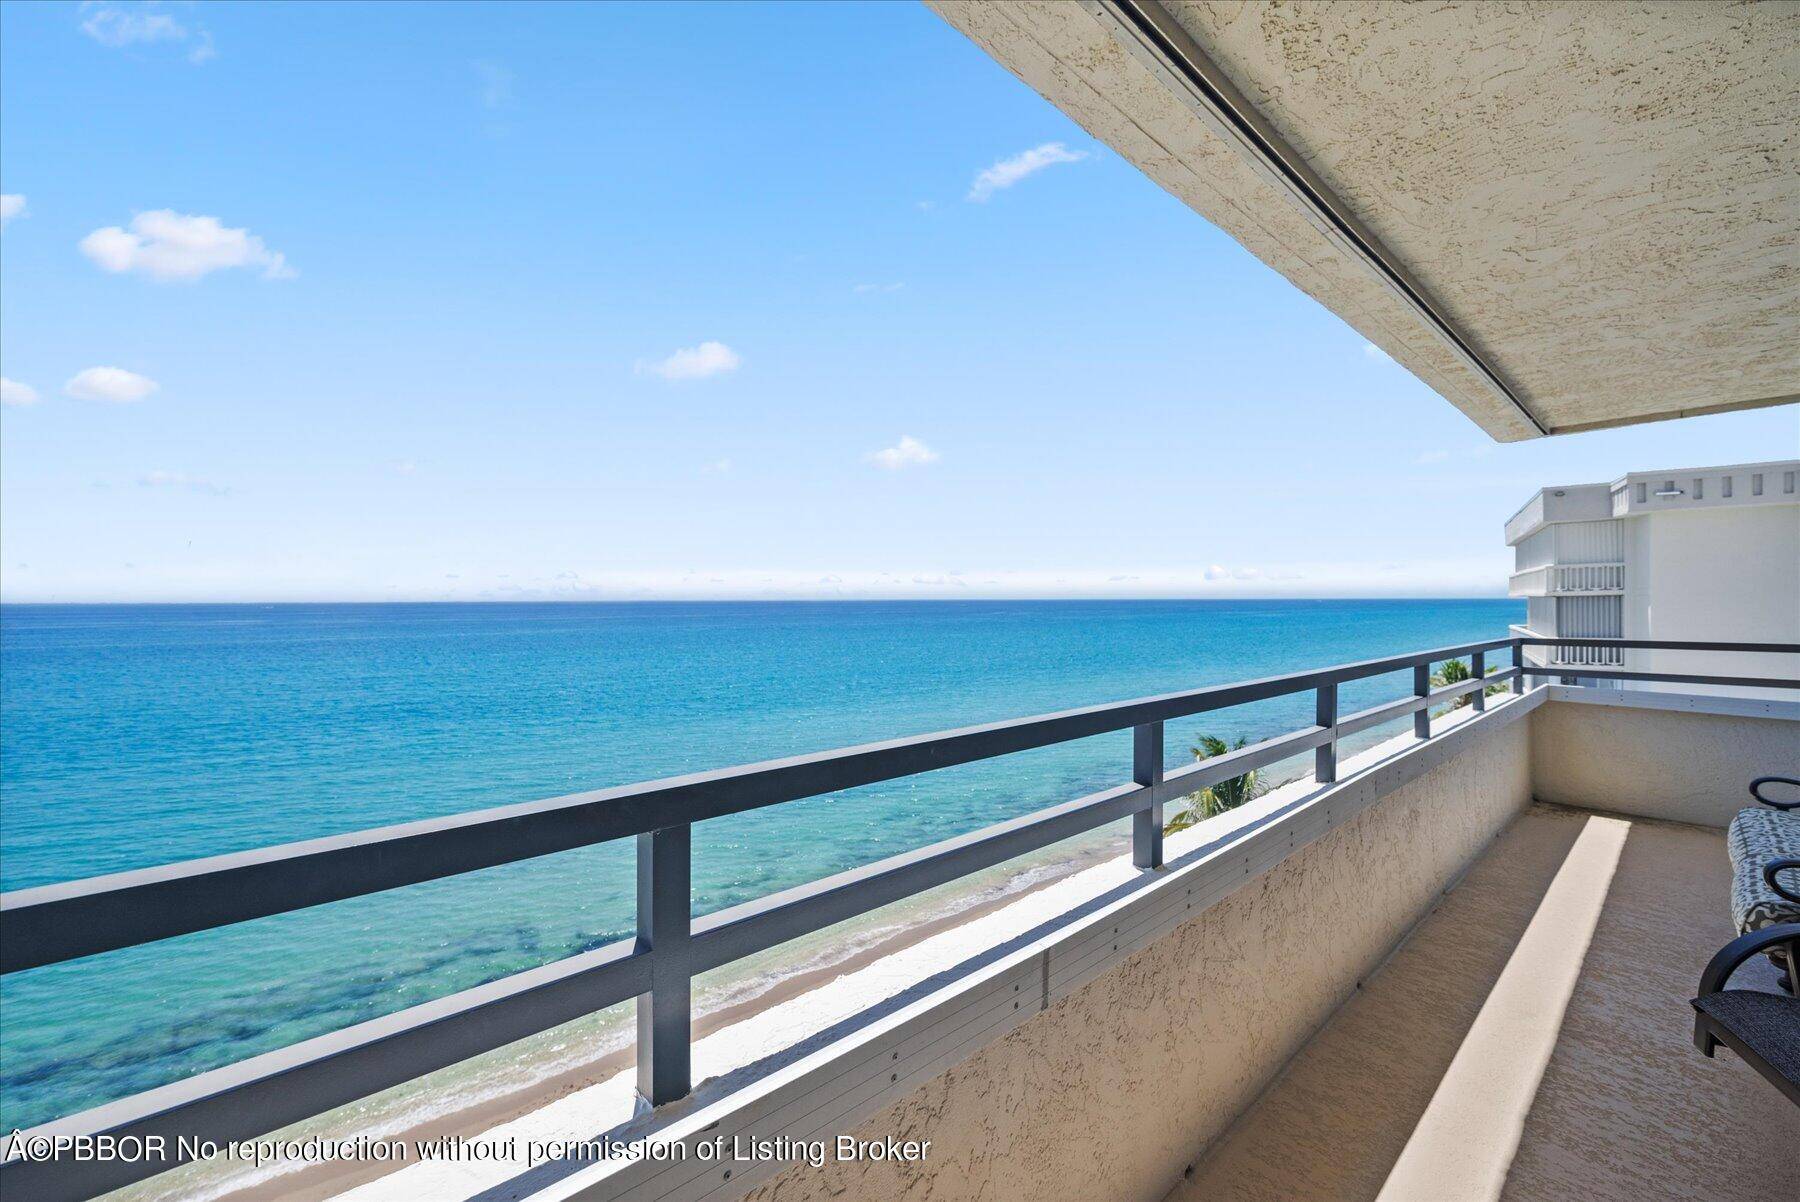 Direct Ocean Views from this 3 Bedroom 2 and a half bath condo with over 2400 SF including a wrap around balcony for expansive SE ocean views from the moment ...